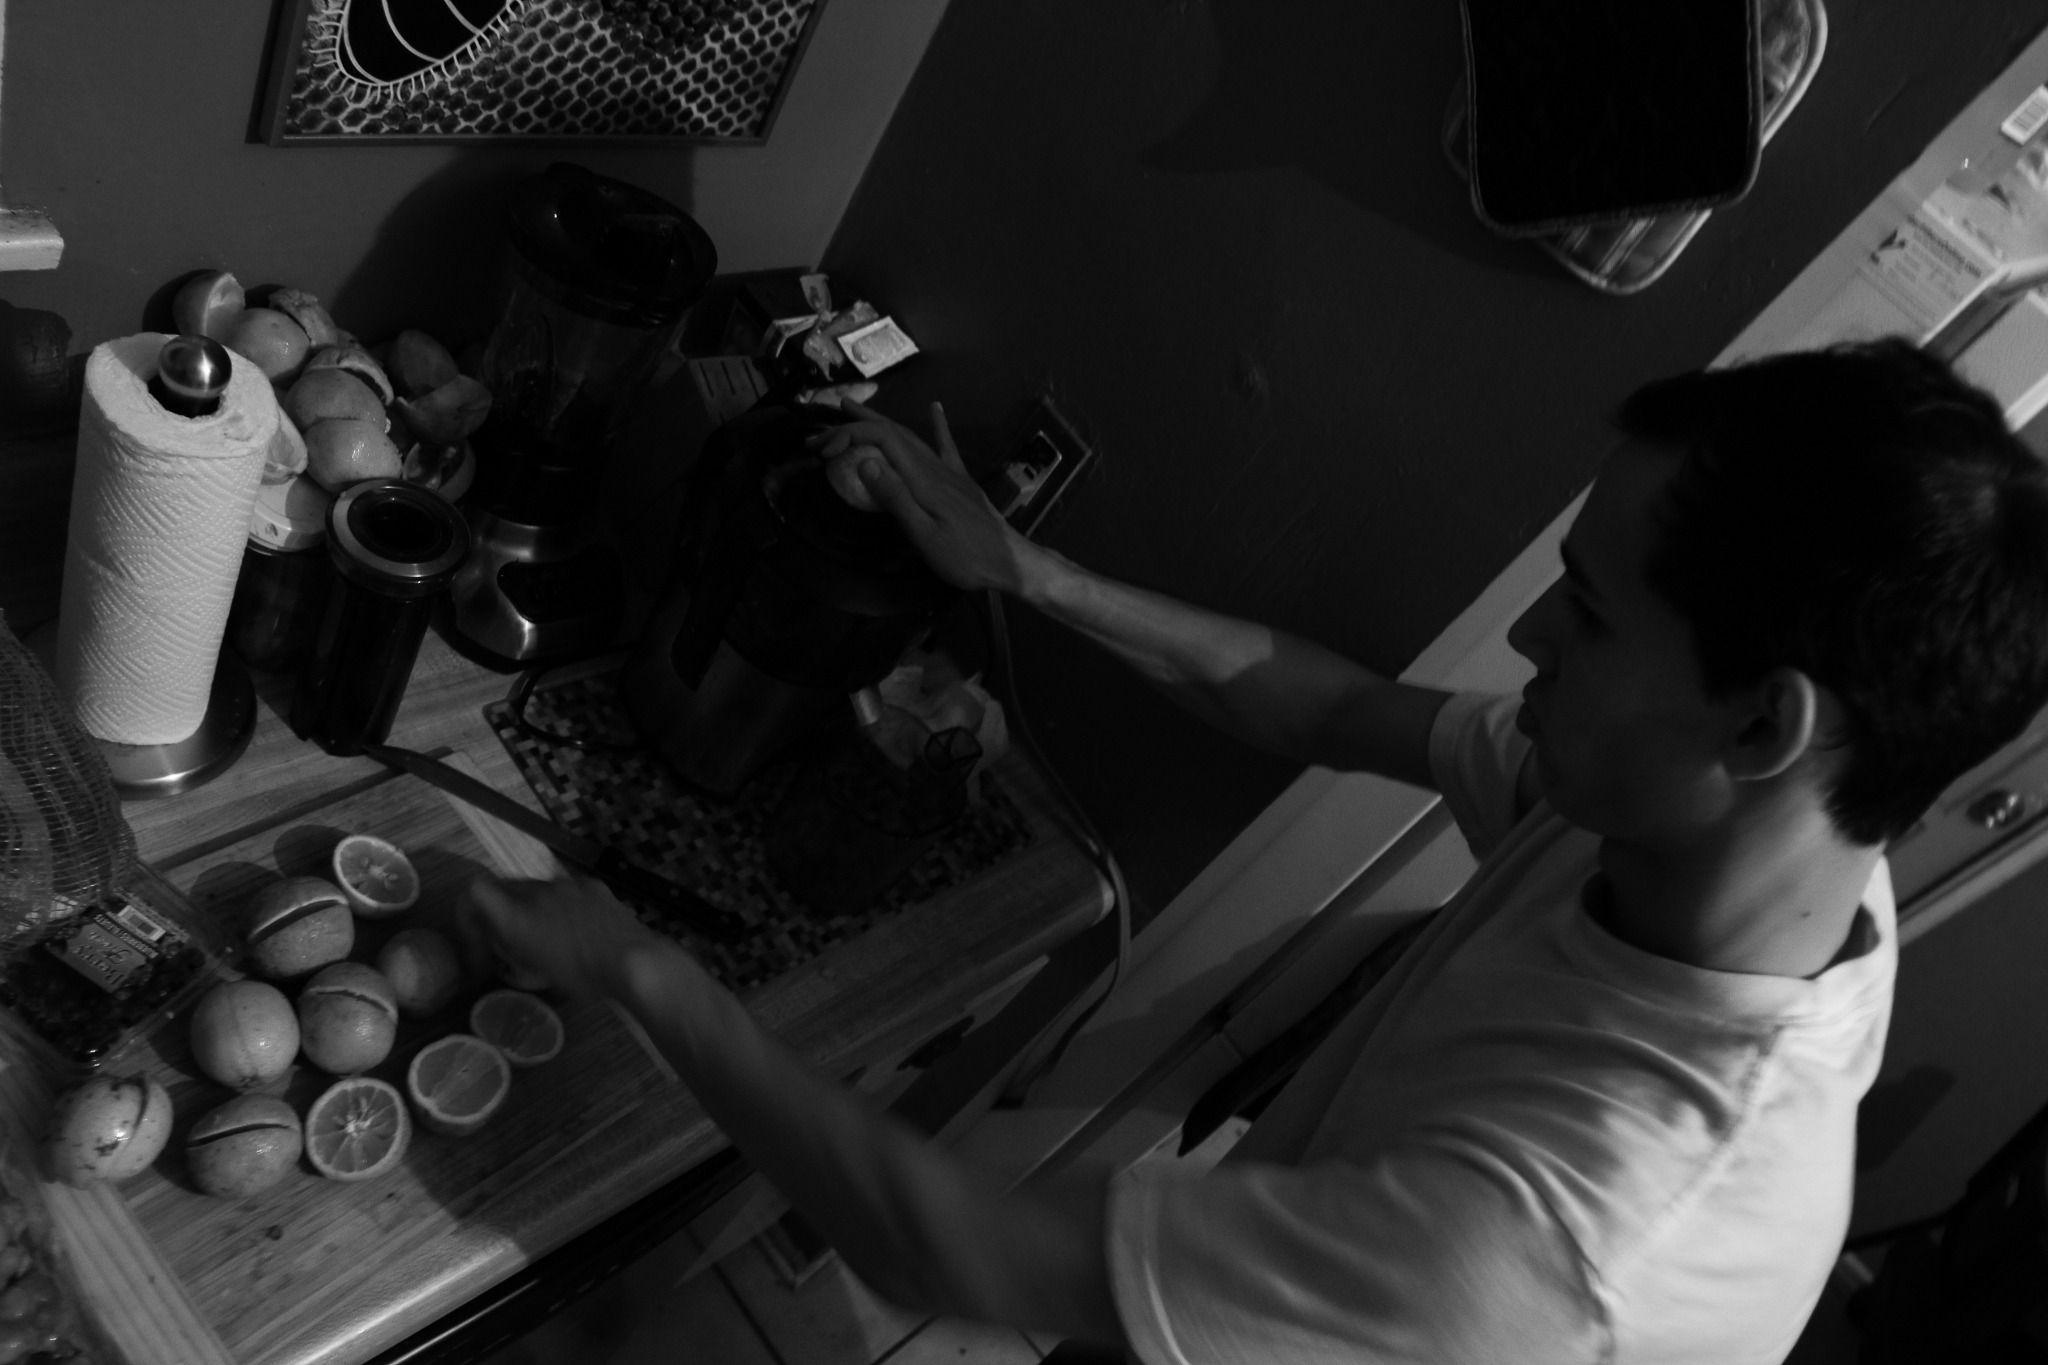 This is a dark grayscale photo taken diagonally from above of someone cutting limes in a kitchen.